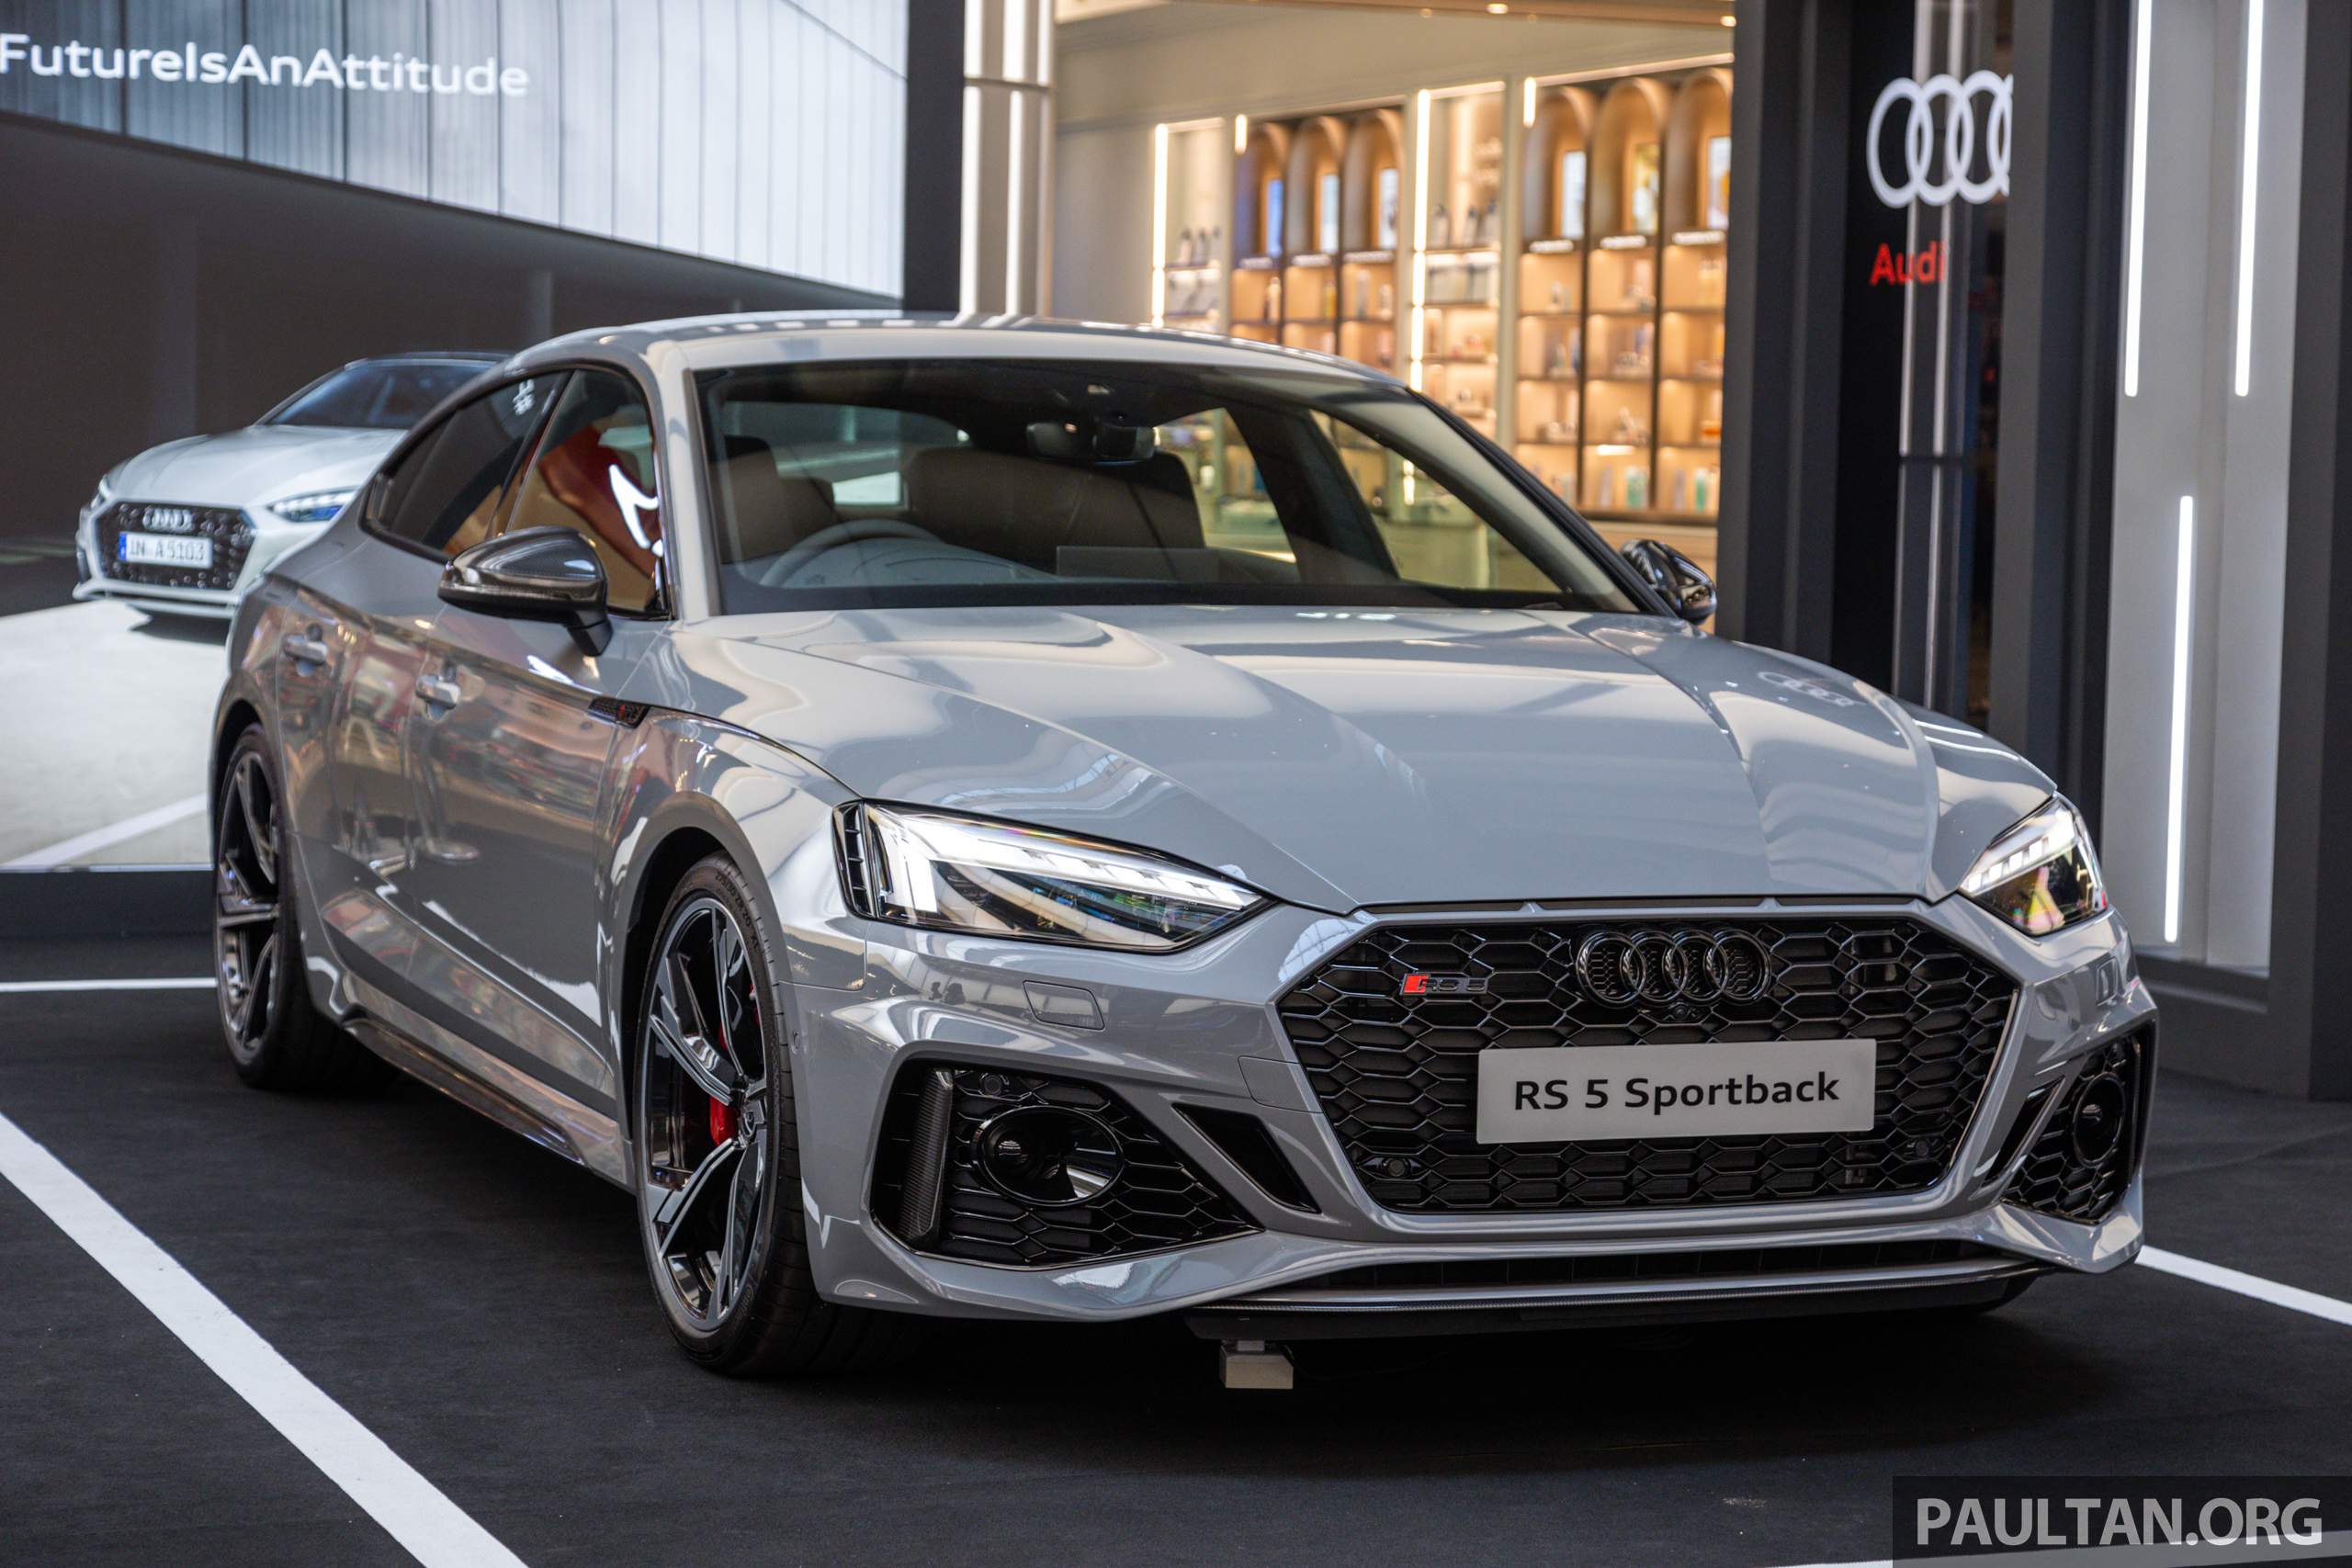 Audi Sportback facelift in Malaysia 450 PS, 650 NM, 280 km/h top speed, RS modes, RM810k - paultan.org